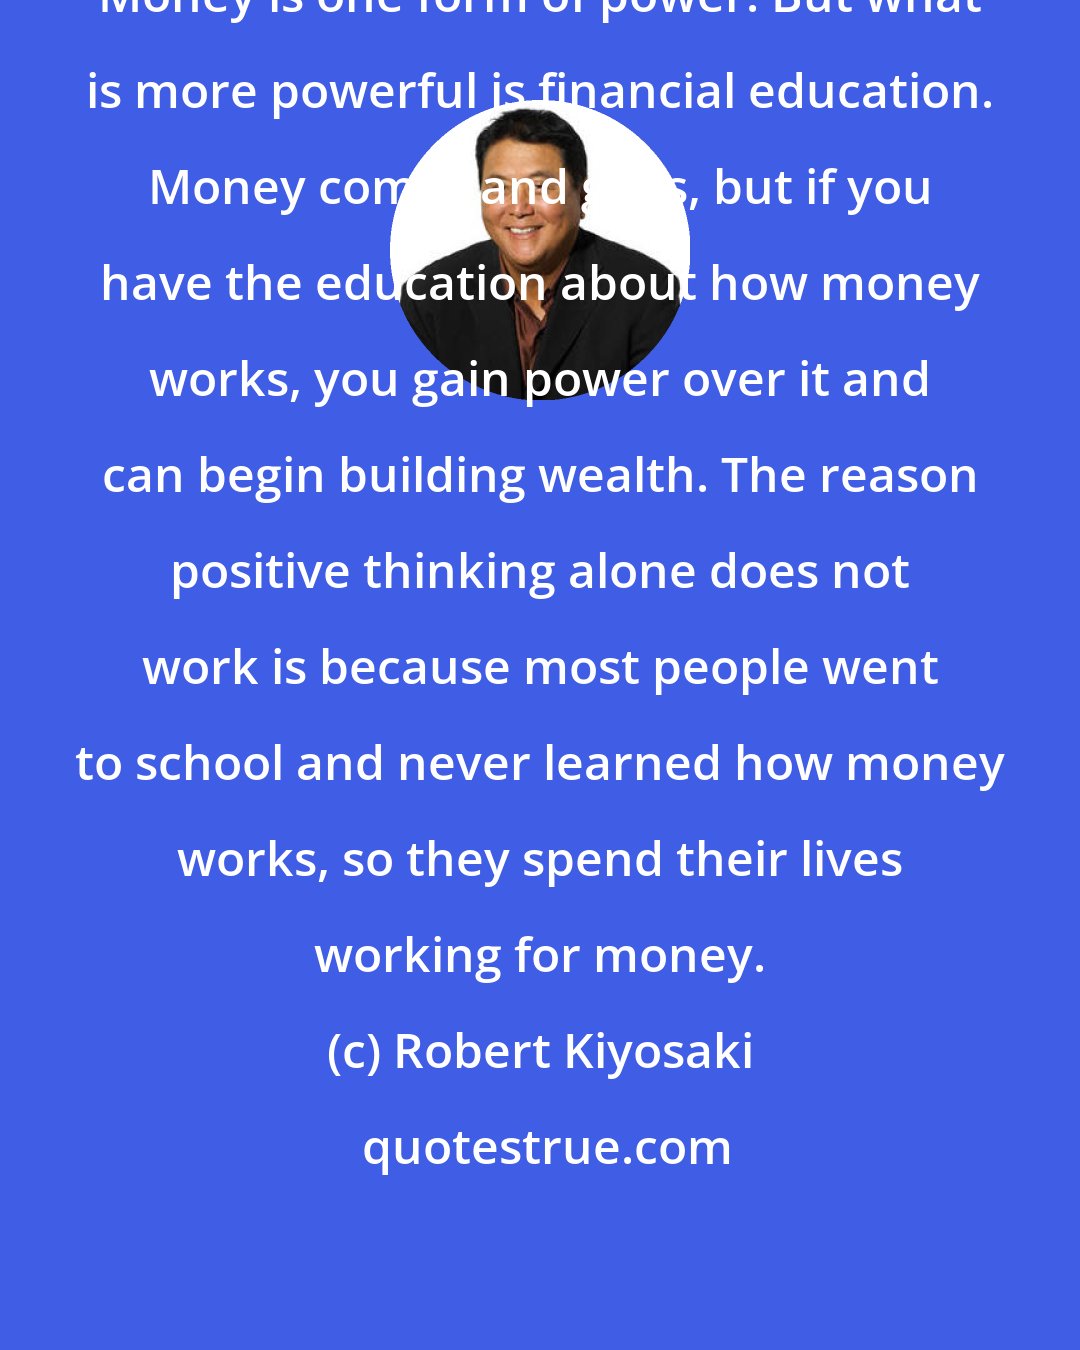 Robert Kiyosaki: Money is one form of power. But what is more powerful is financial education. Money comes and goes, but if you have the education about how money works, you gain power over it and can begin building wealth. The reason positive thinking alone does not work is because most people went to school and never learned how money works, so they spend their lives working for money.